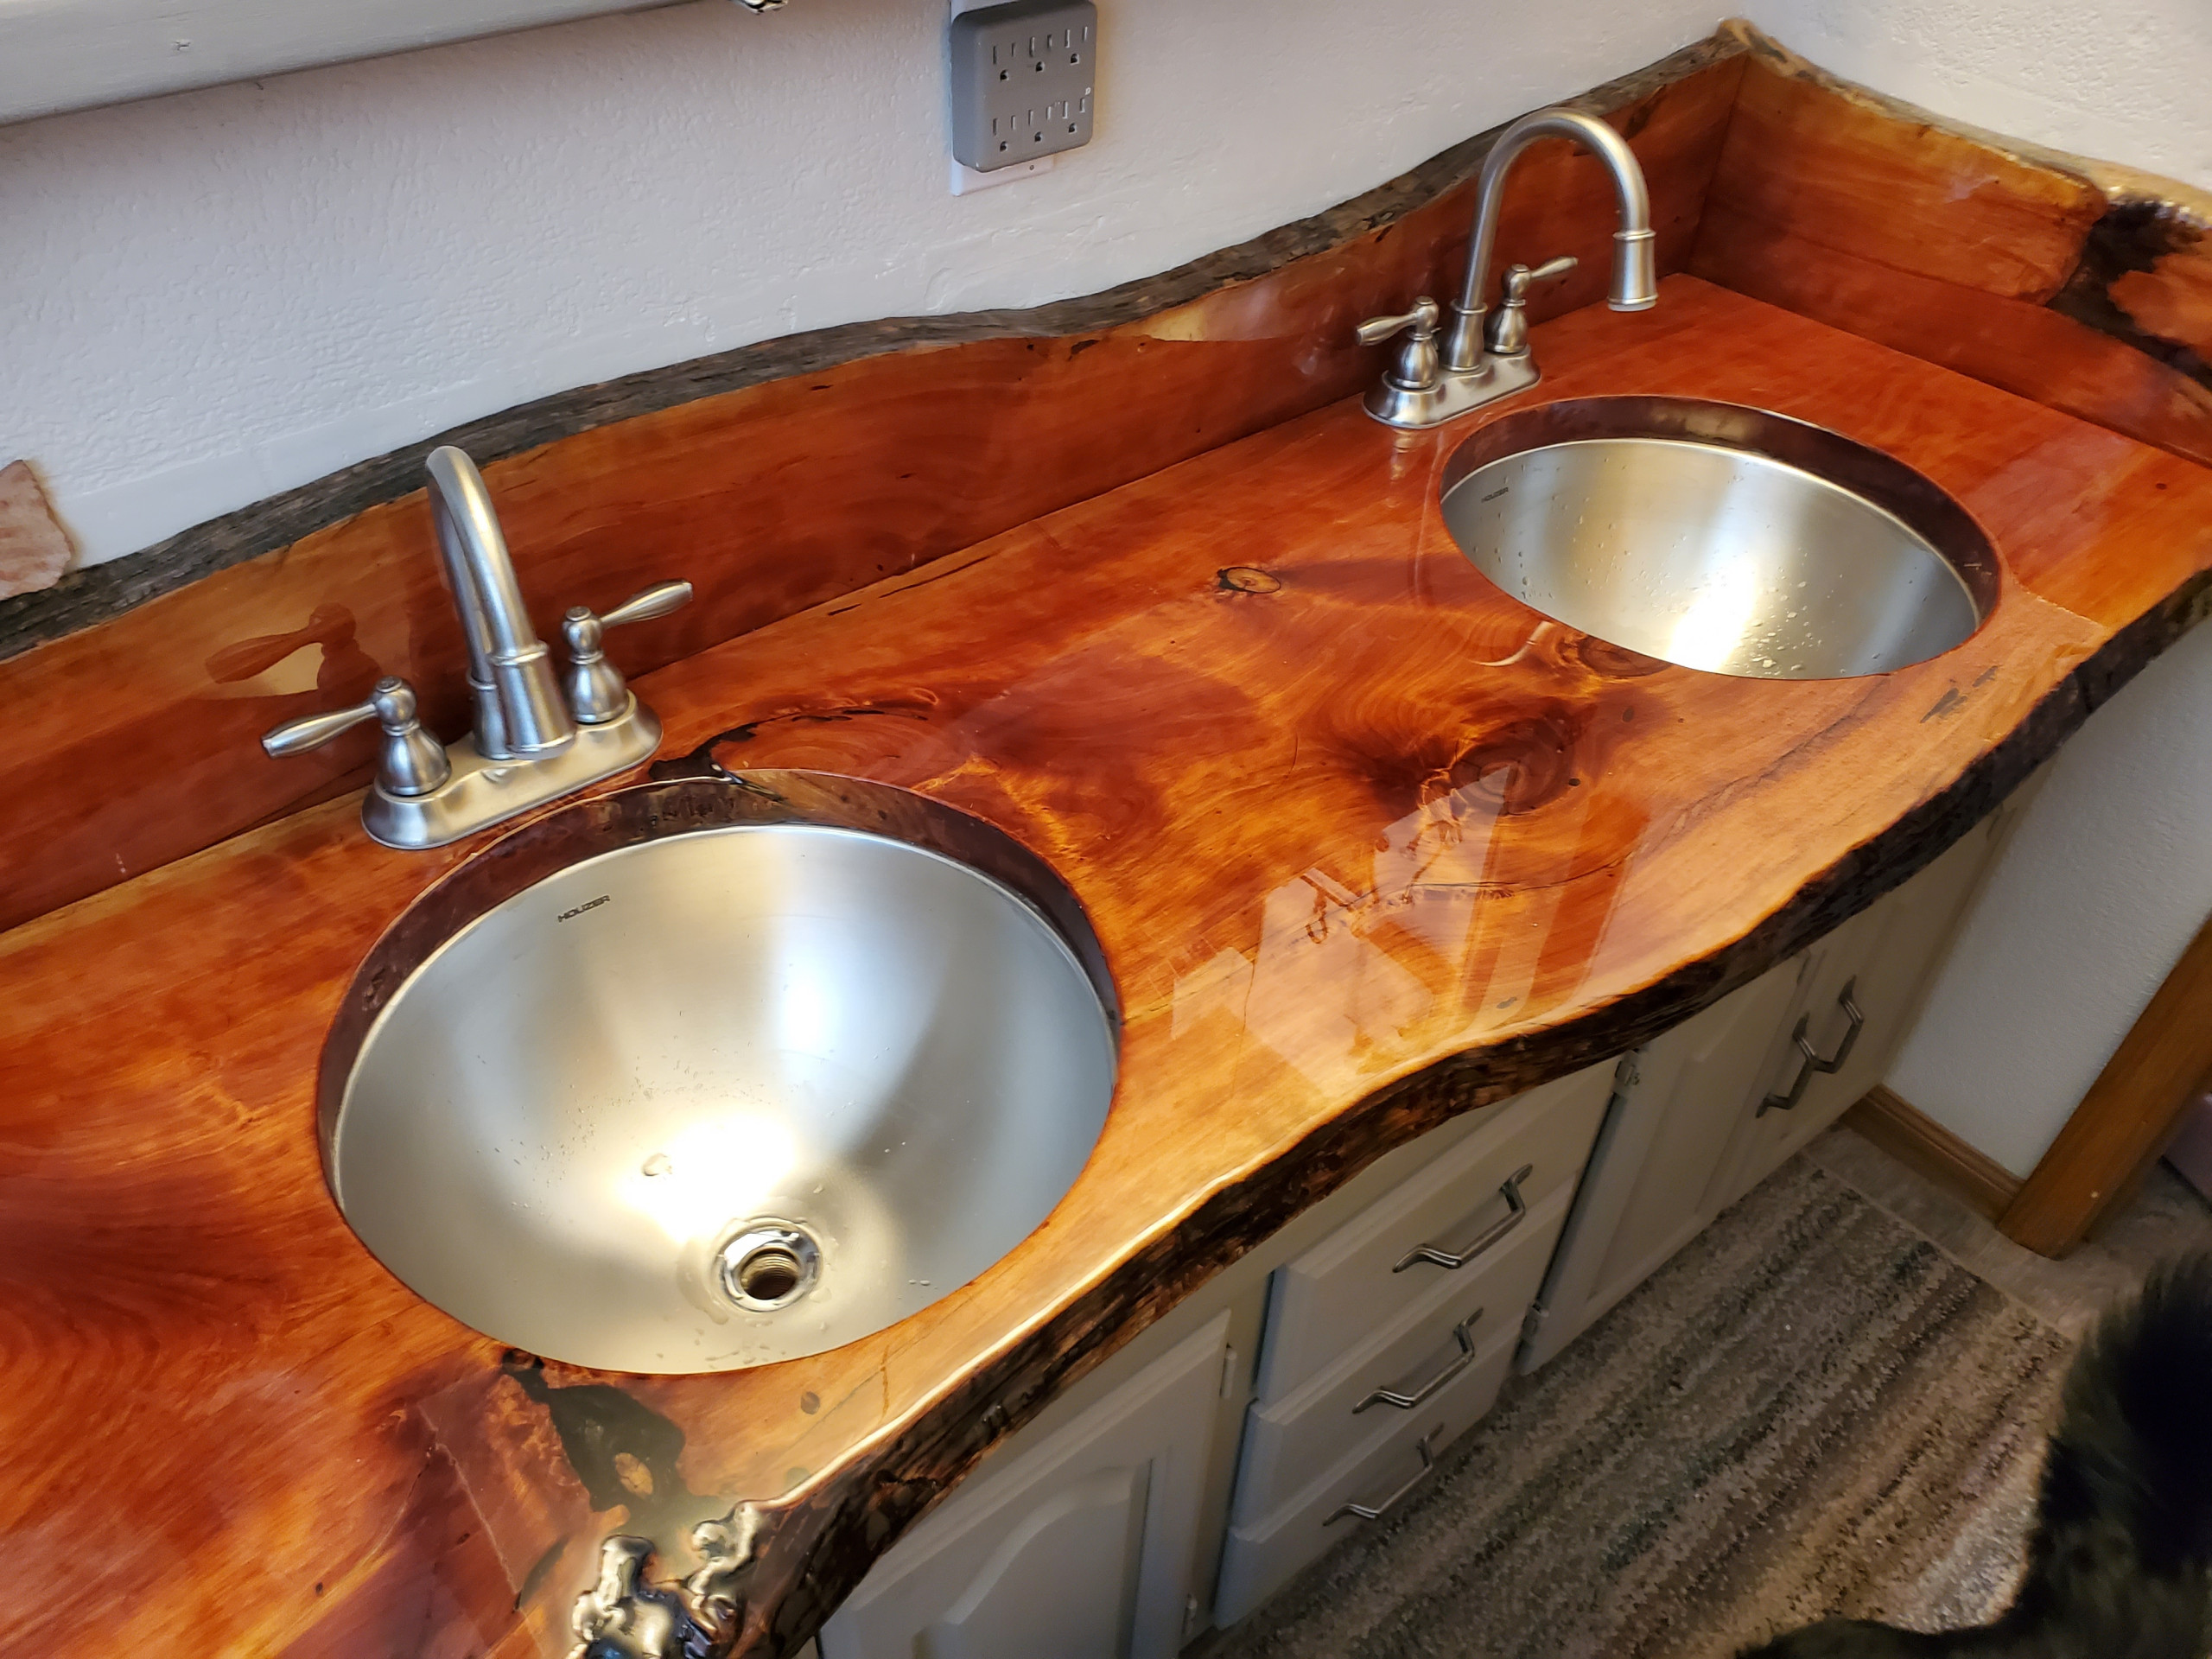 Installed and ready for use, this piece of Juniper shows remarkable grain definition and color depth, absolutely stunning countertop.